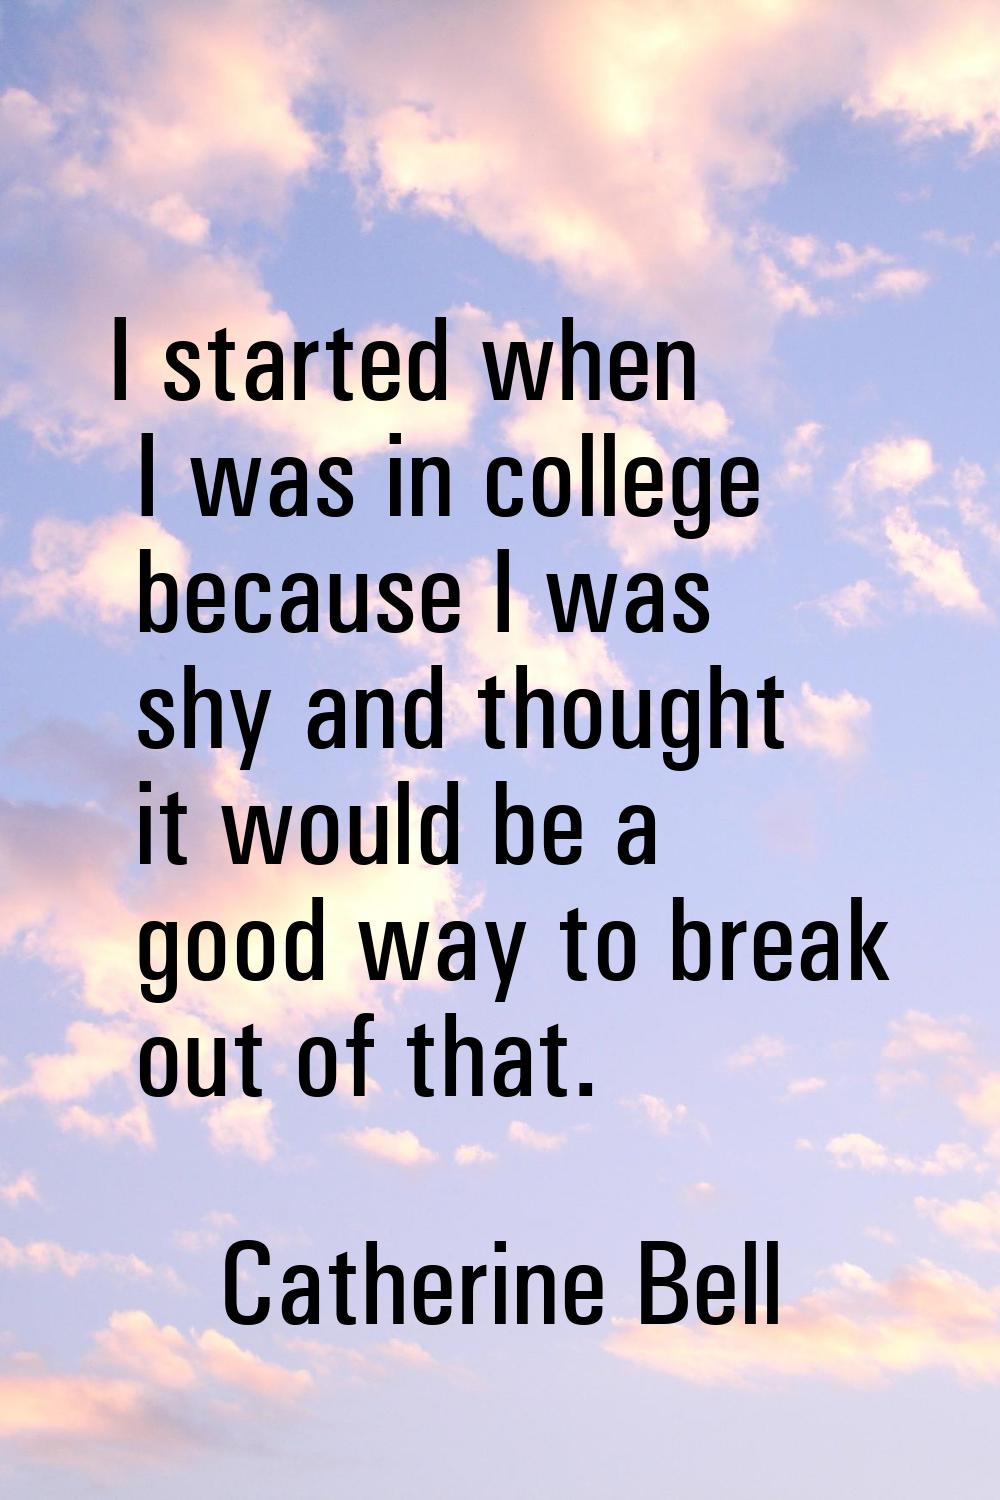 I started when I was in college because I was shy and thought it would be a good way to break out o